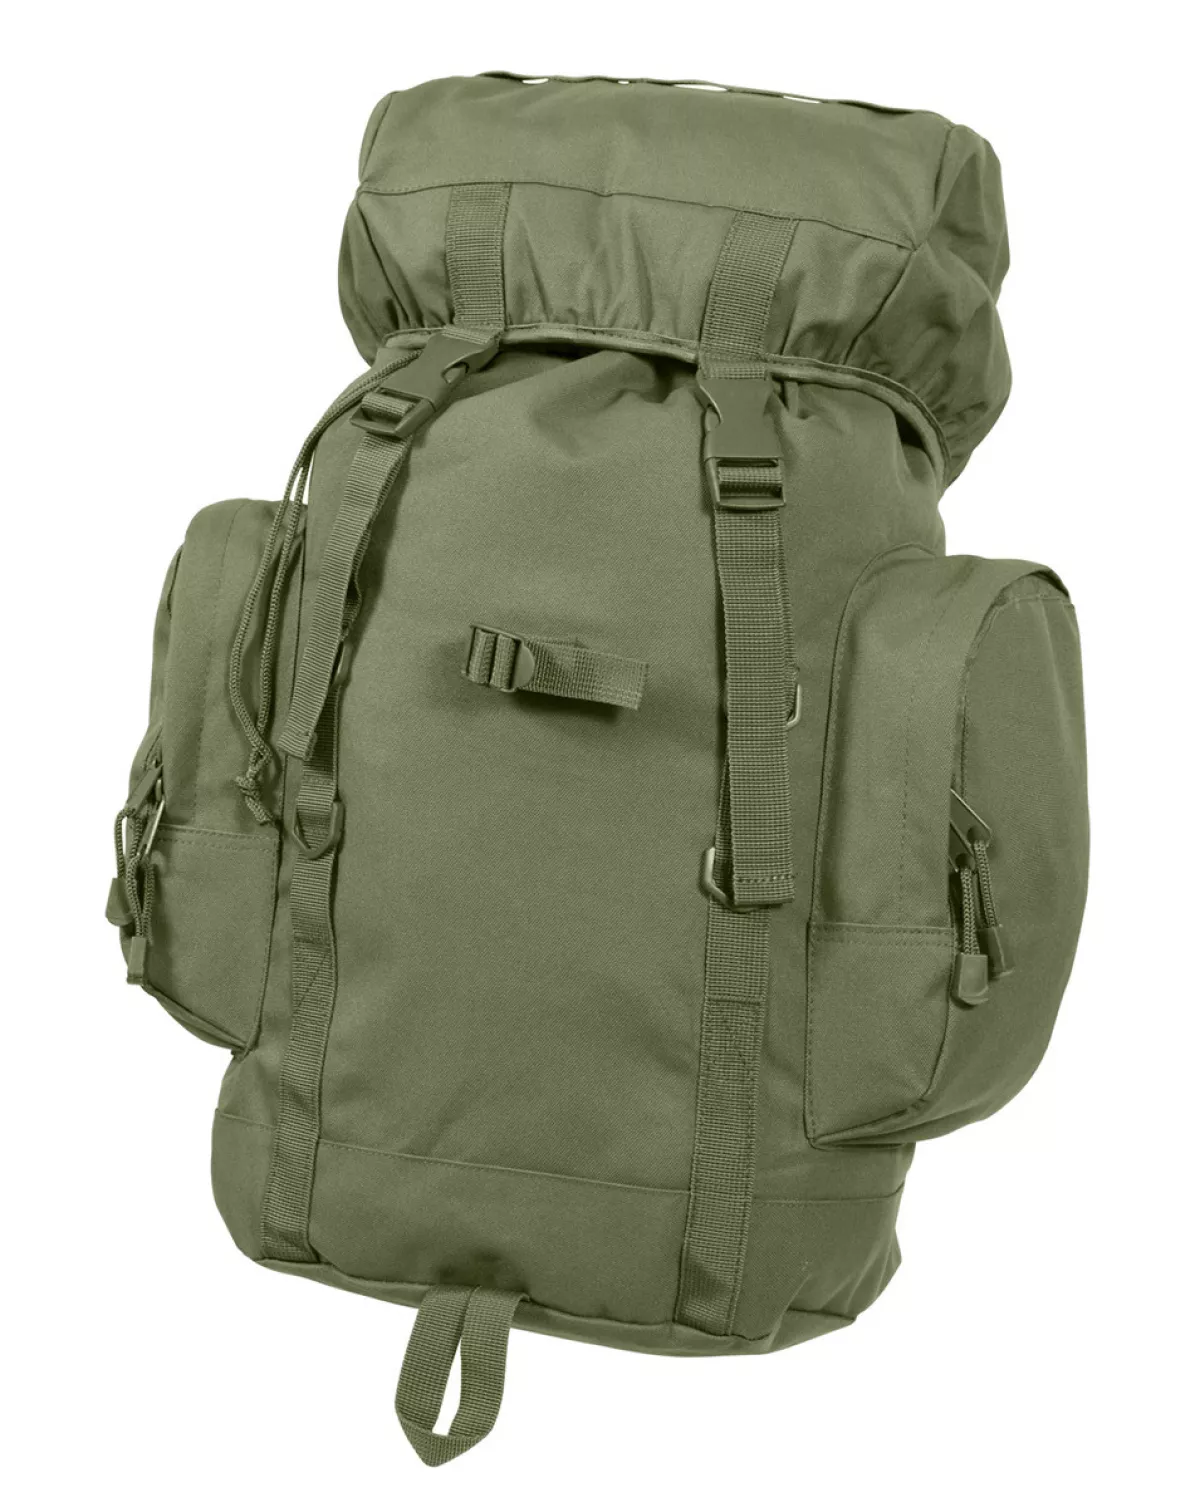 #2 - Rothco Tactical Backpack - 25 Liter (Oliven, One Size)